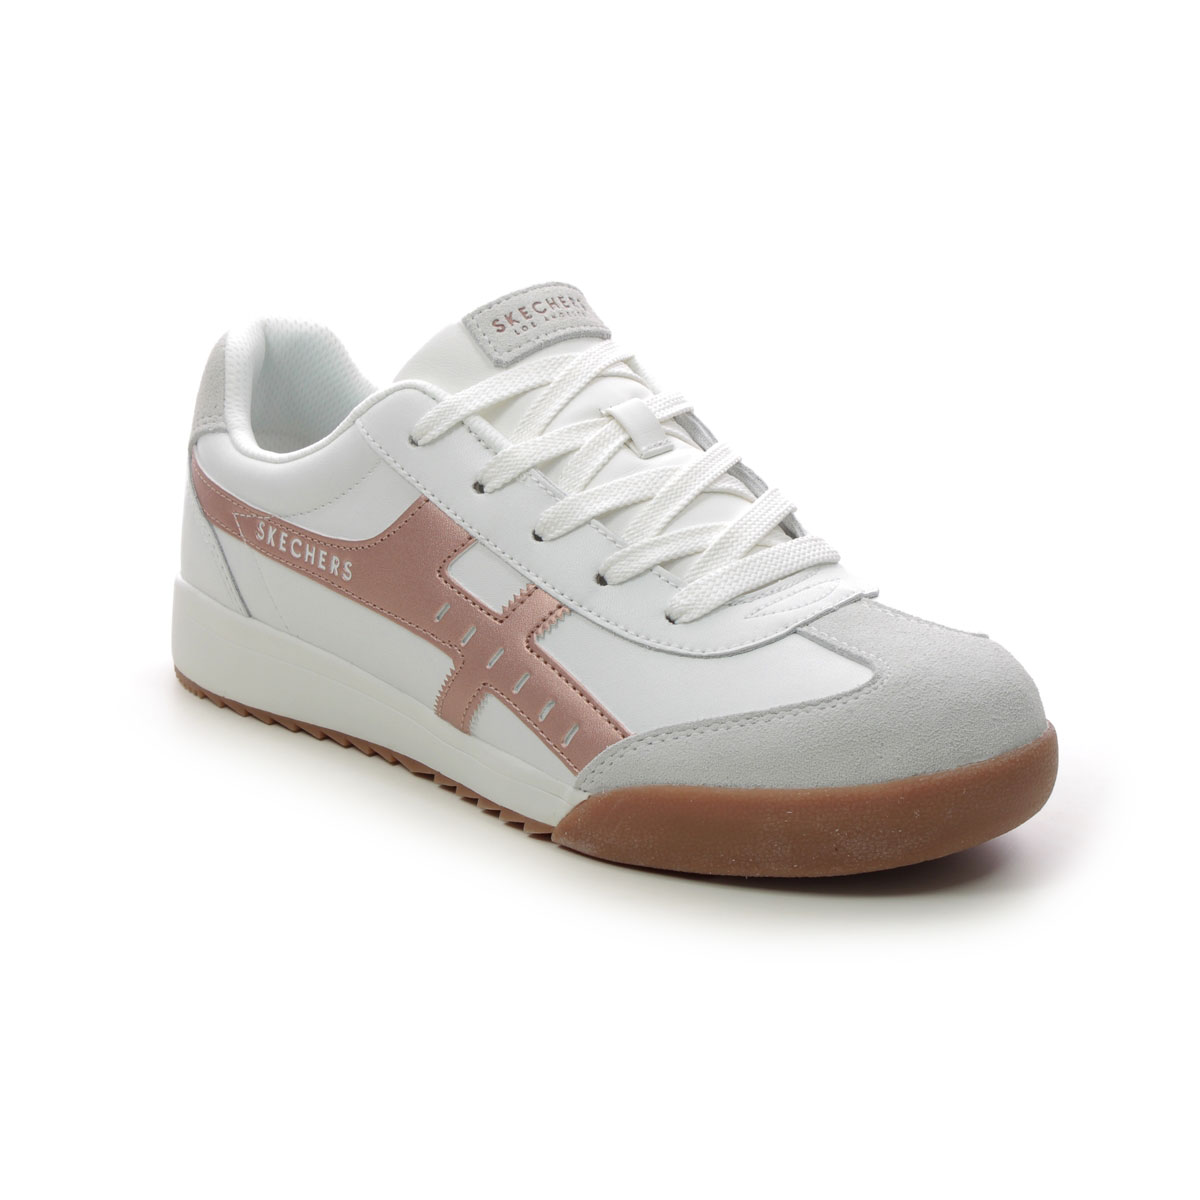 Skechers Zinger Ladies WTRG White Rose gold Womens trainers 177500 in a Plain Leather and Man-made in Size 7